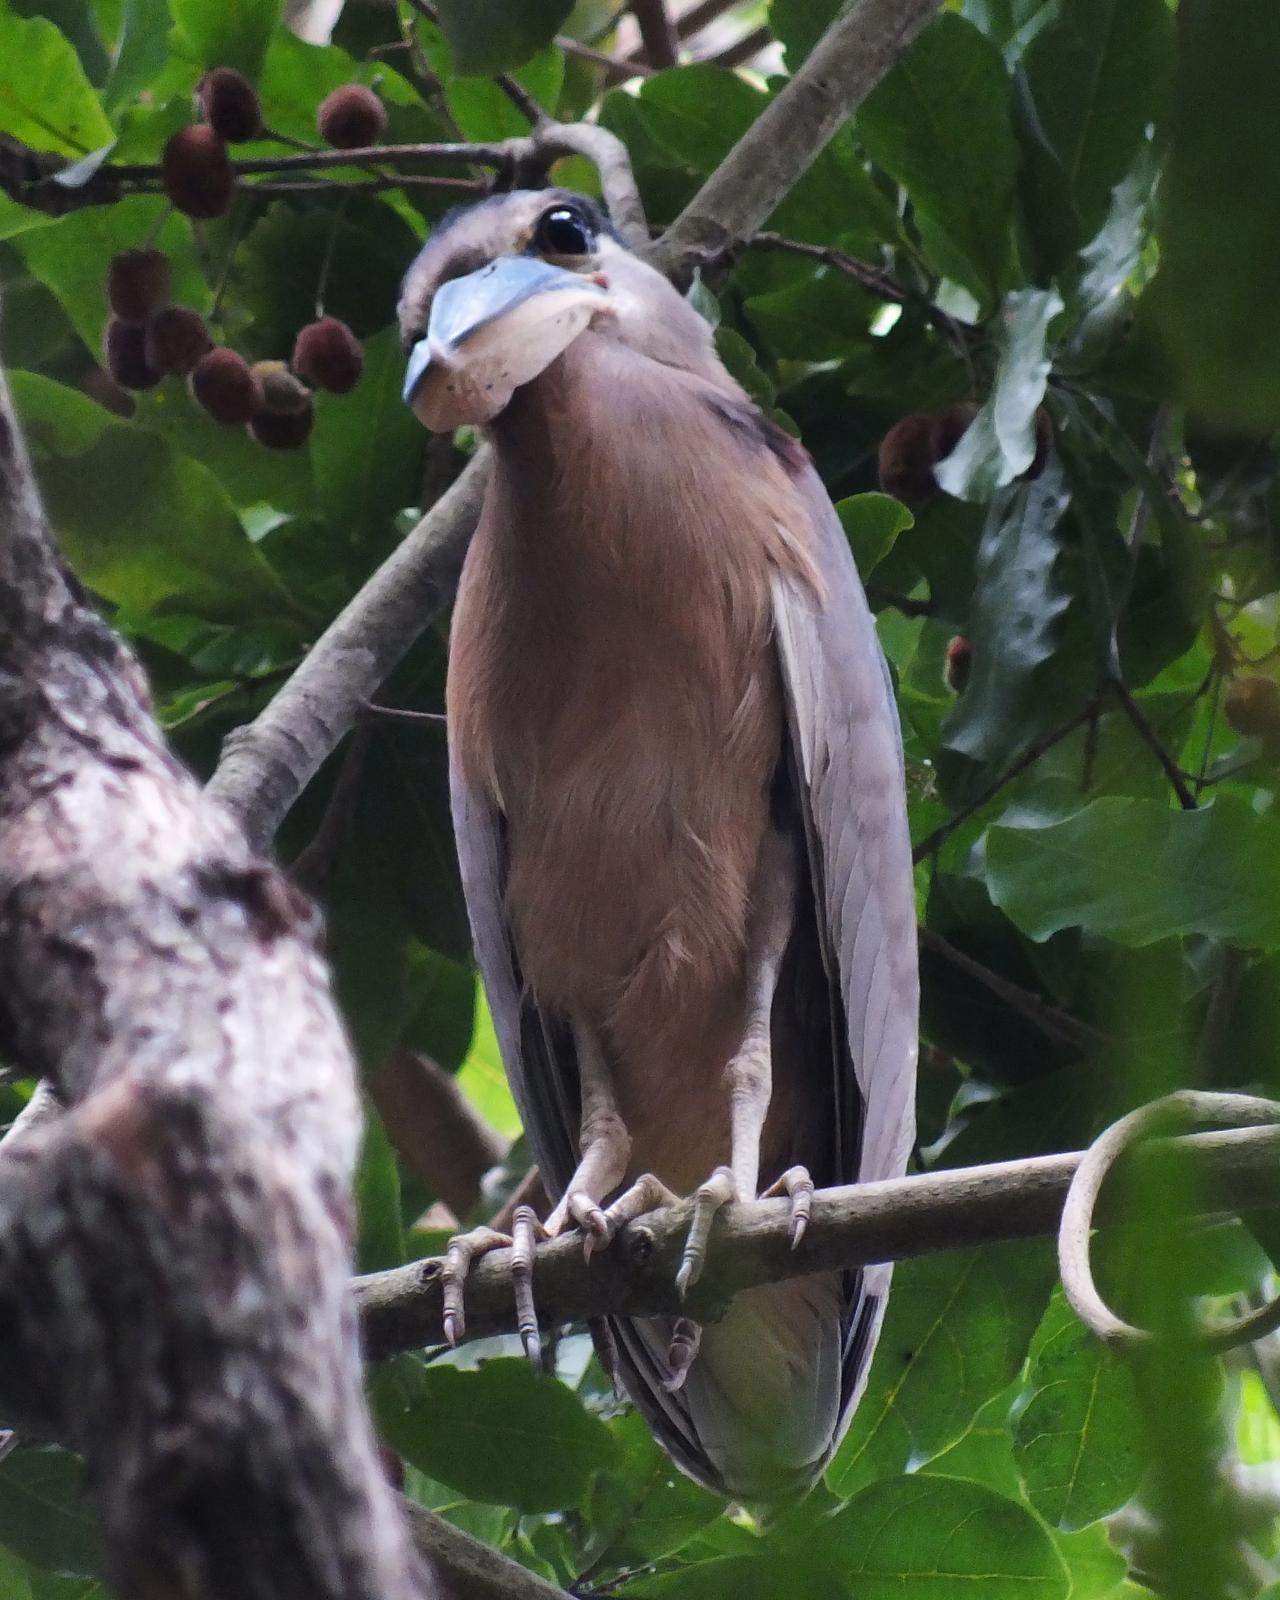 Boat-billed Heron Photo by Jeniffer Abrego